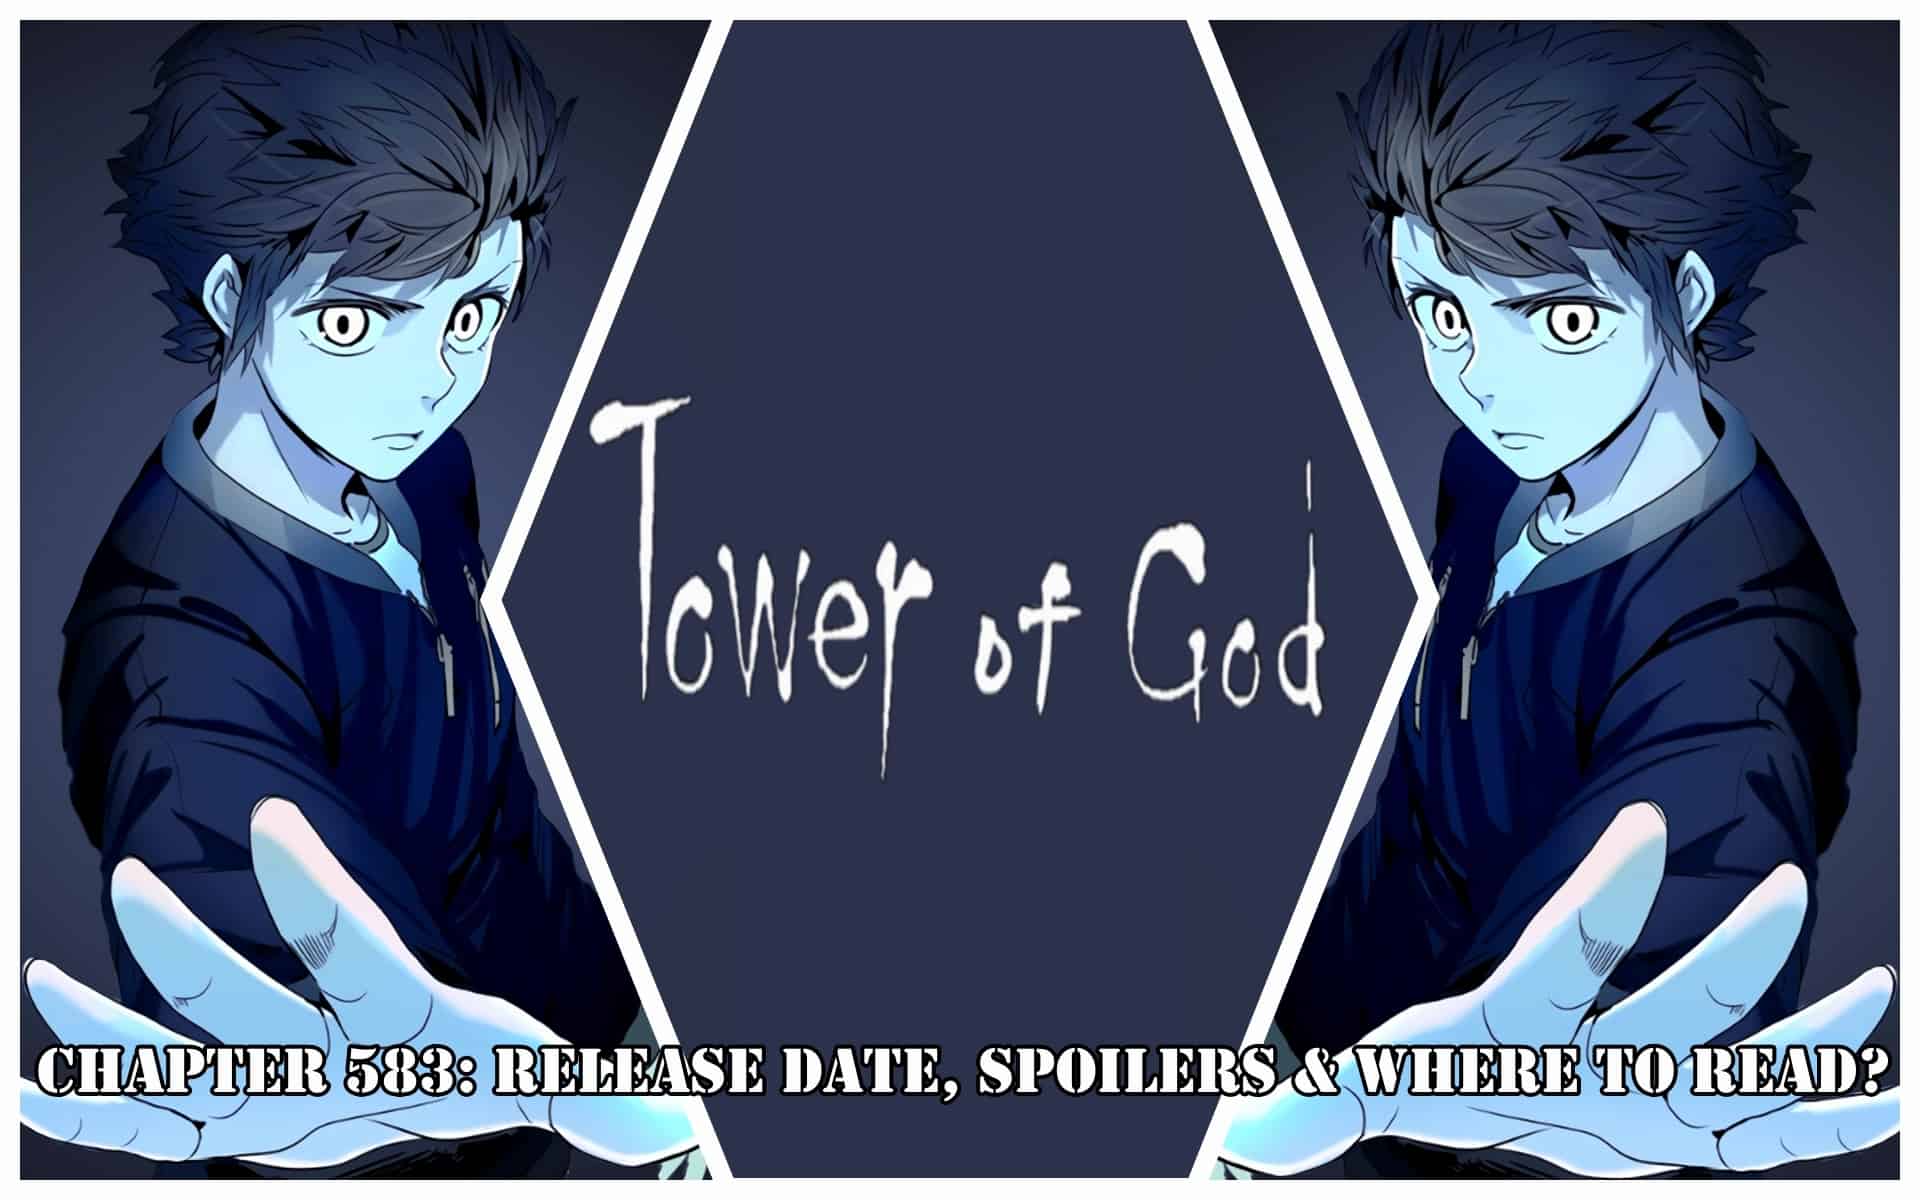 Tower Of God Chapter 583: Release Date, Spoilers & Where to Read?